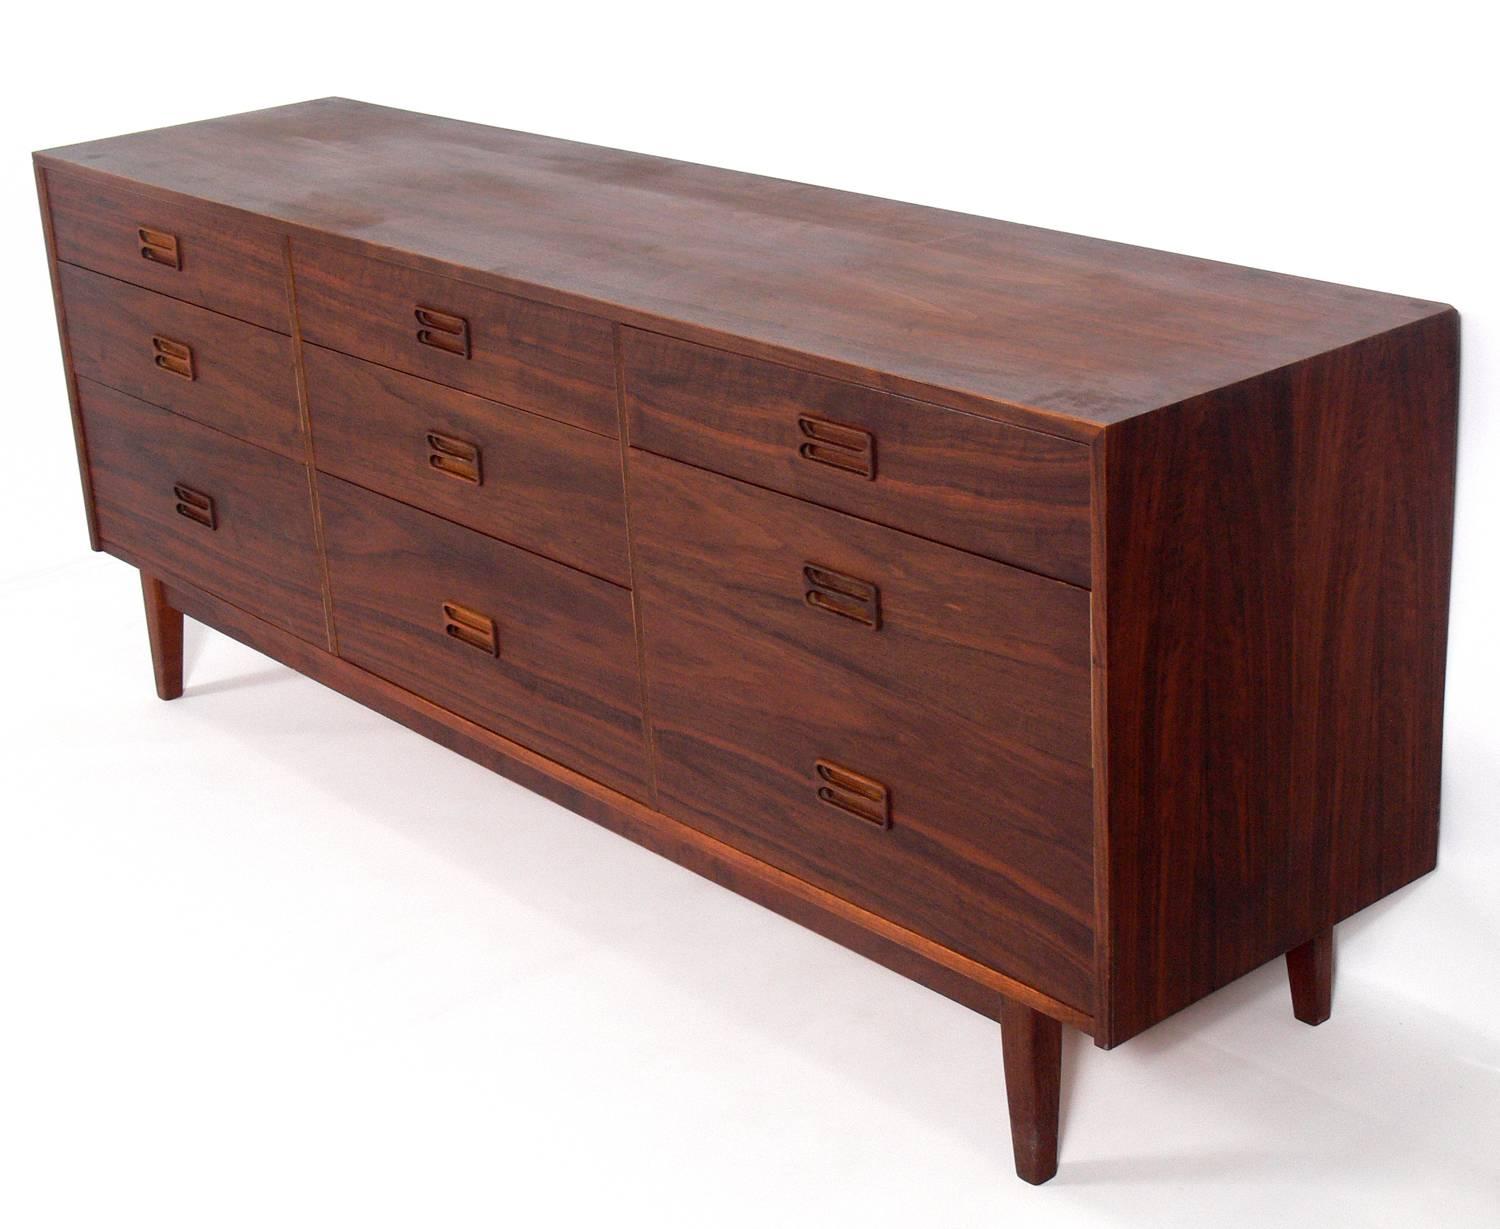 Danish modern walnut chest or dresser with beautiful graining, Denmark, circa 1960s. This piece is currently being refinished and will look incredible when it's completed. This piece is a versatile size and can be used as a chest or dresser in a